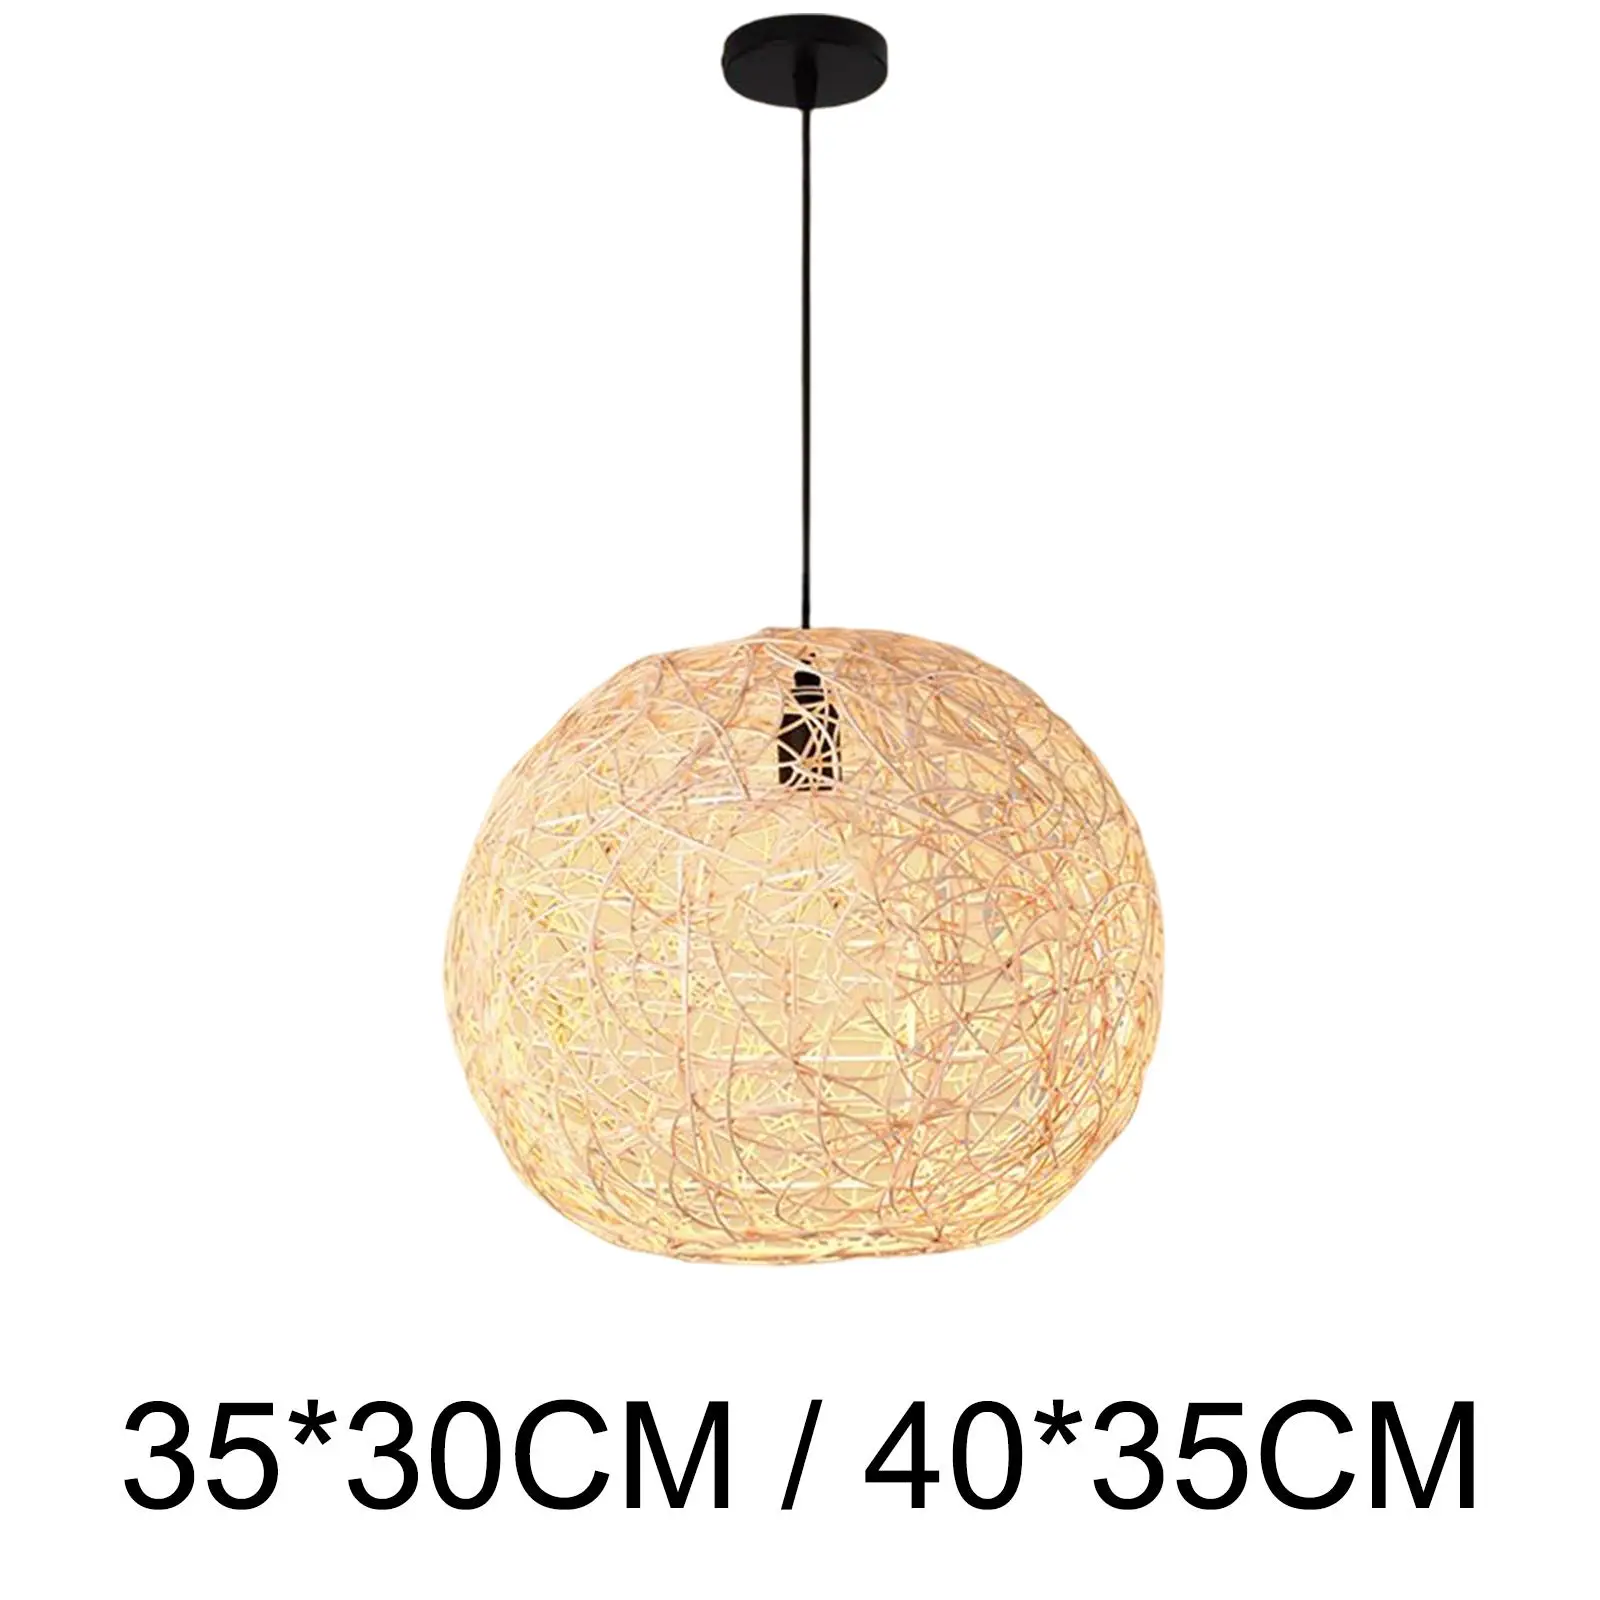 Bamboo Woven Light Shade Pendant Light Ceiling Lampshade Cage Guard Cafe